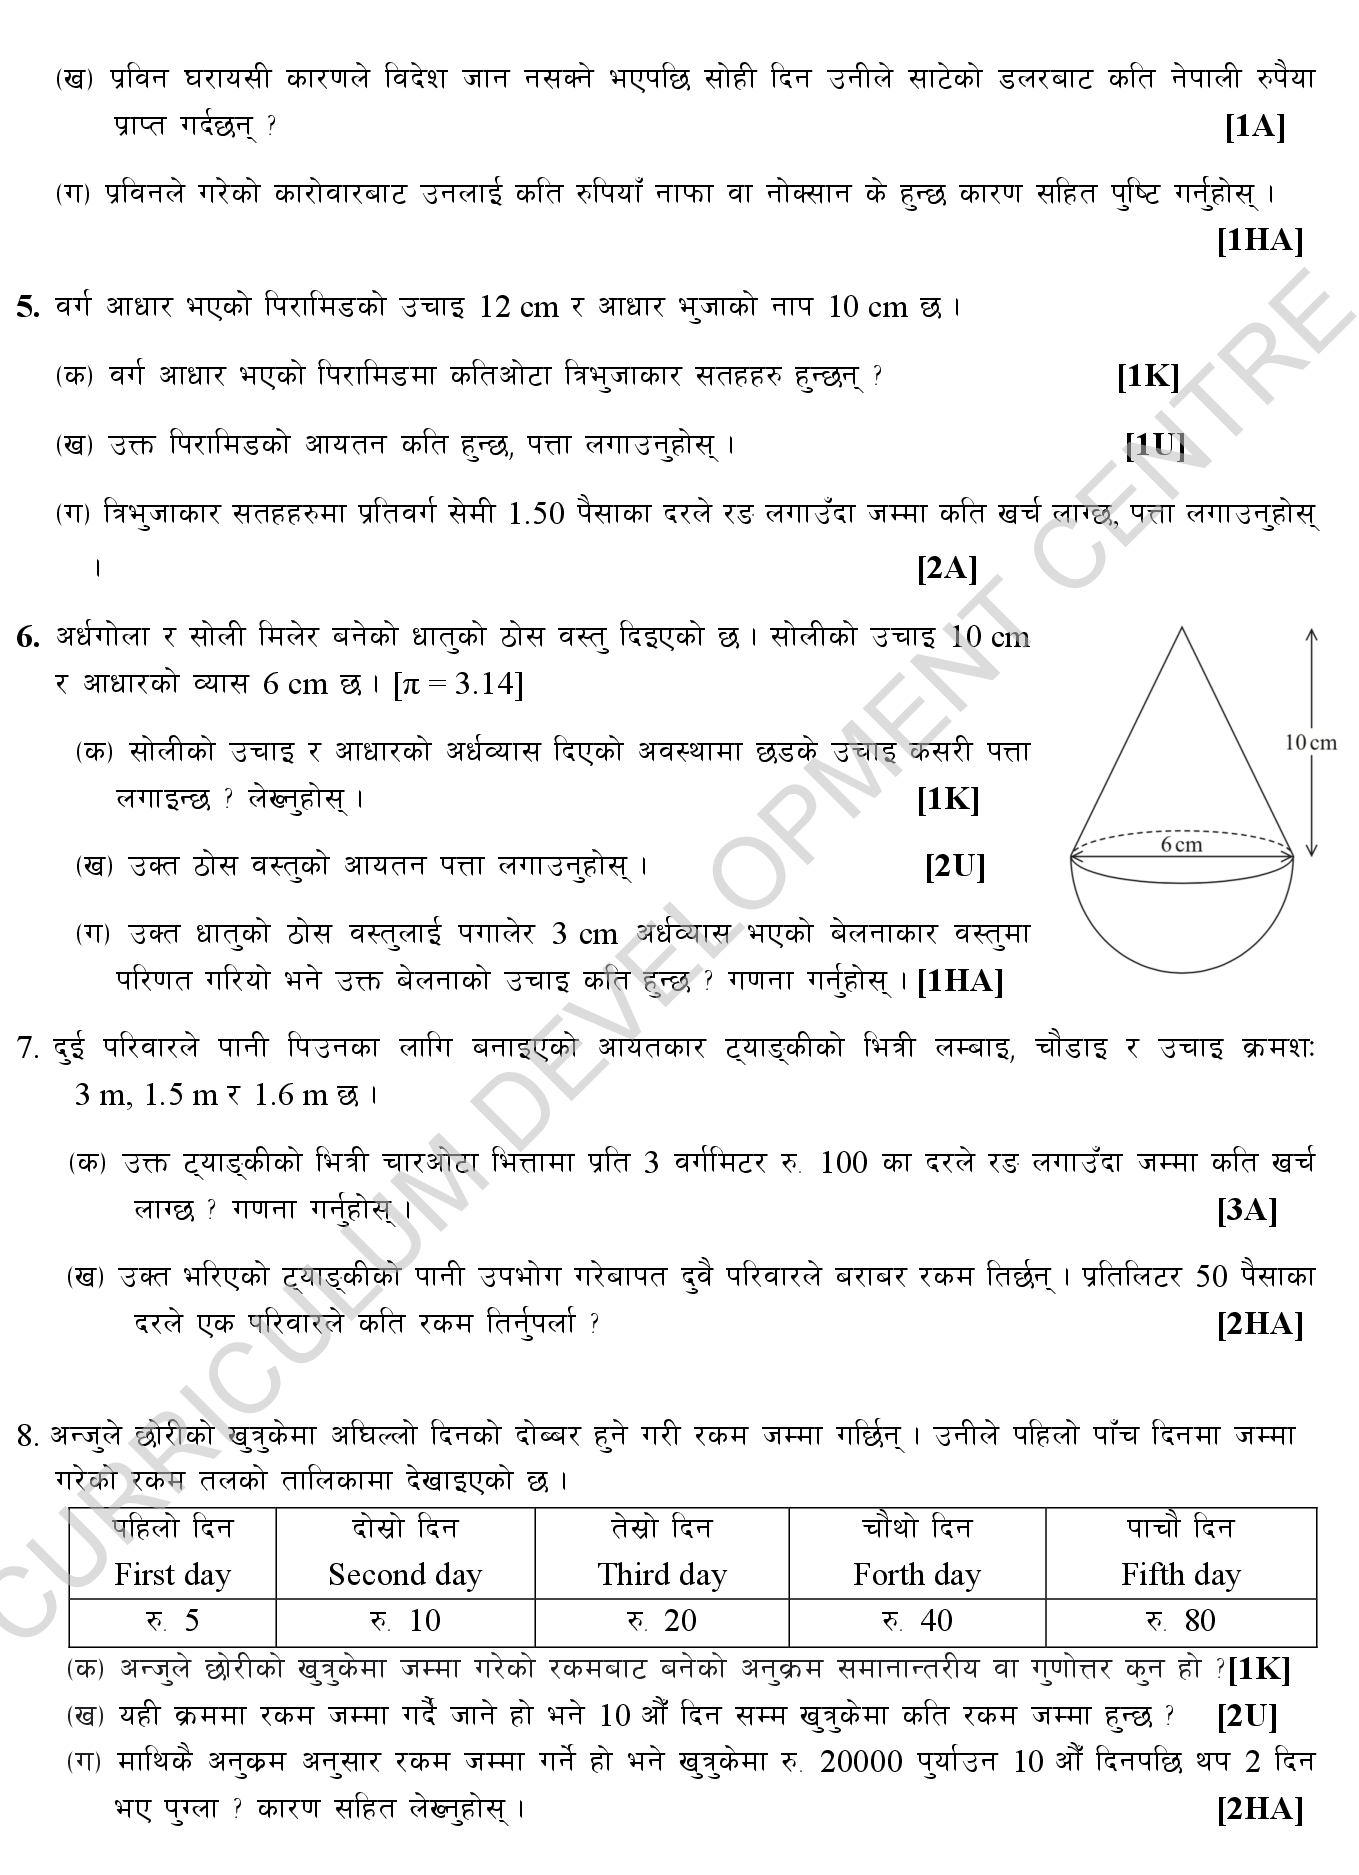 Class 10 SEE Mathematics Model Question 2080 (in Nepali)